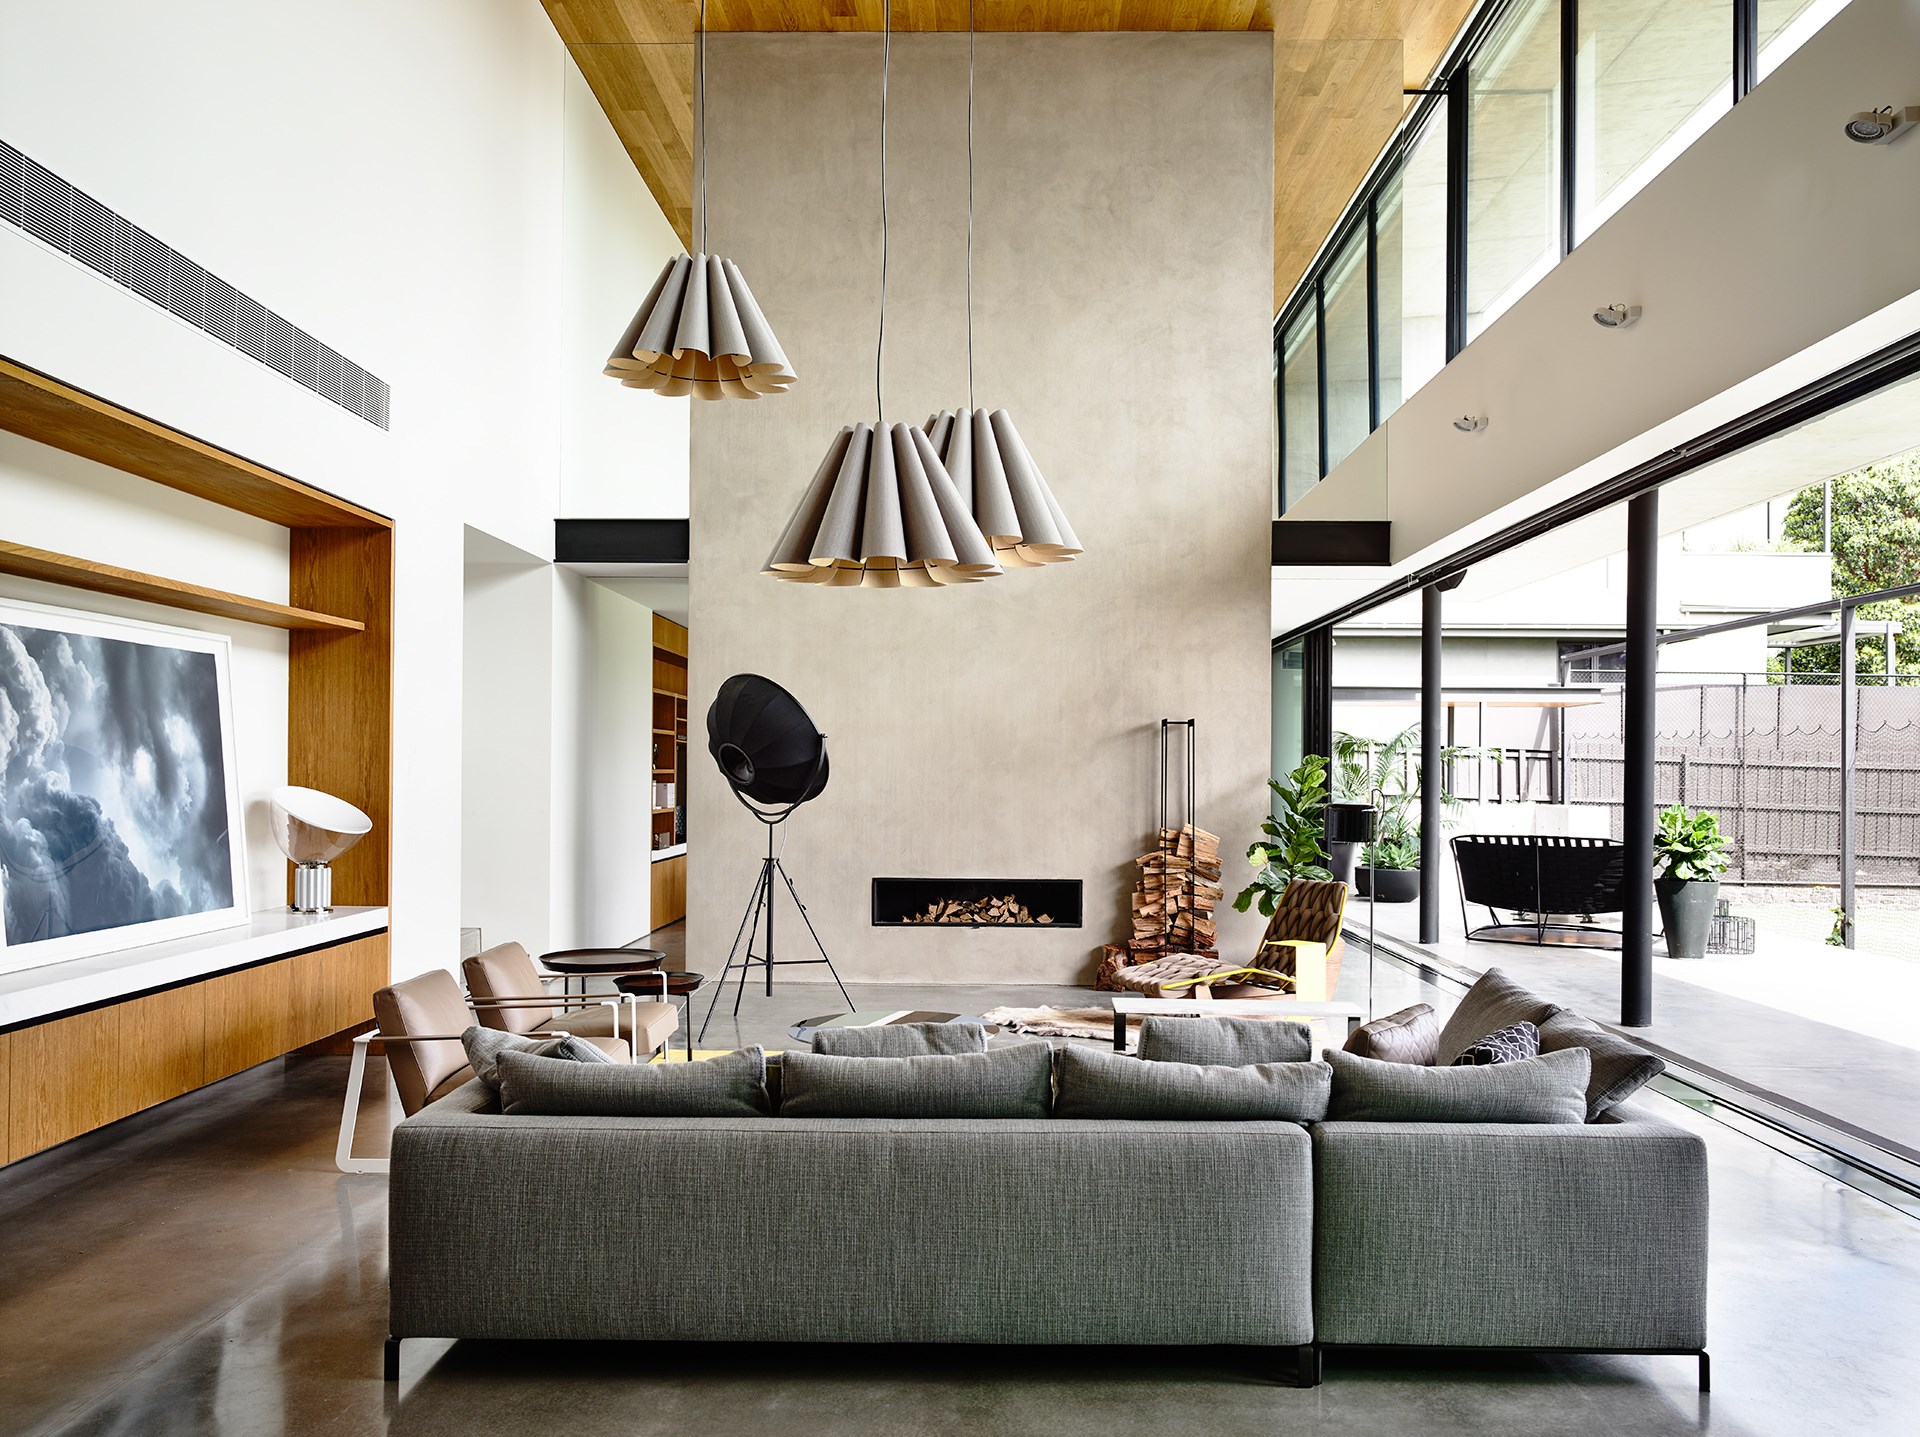 Deftly folded pendant lights floating above the furniture add a delicate and somewhat ethereal touch to this vast modern living room. Take a tour of this [modernist marvel in Melbourne](http://www.homestolove.com.au/expansive-modernist-house-in-melbourne-2426|target="_blank"). Photo: Derek Swalwell / *Belle*